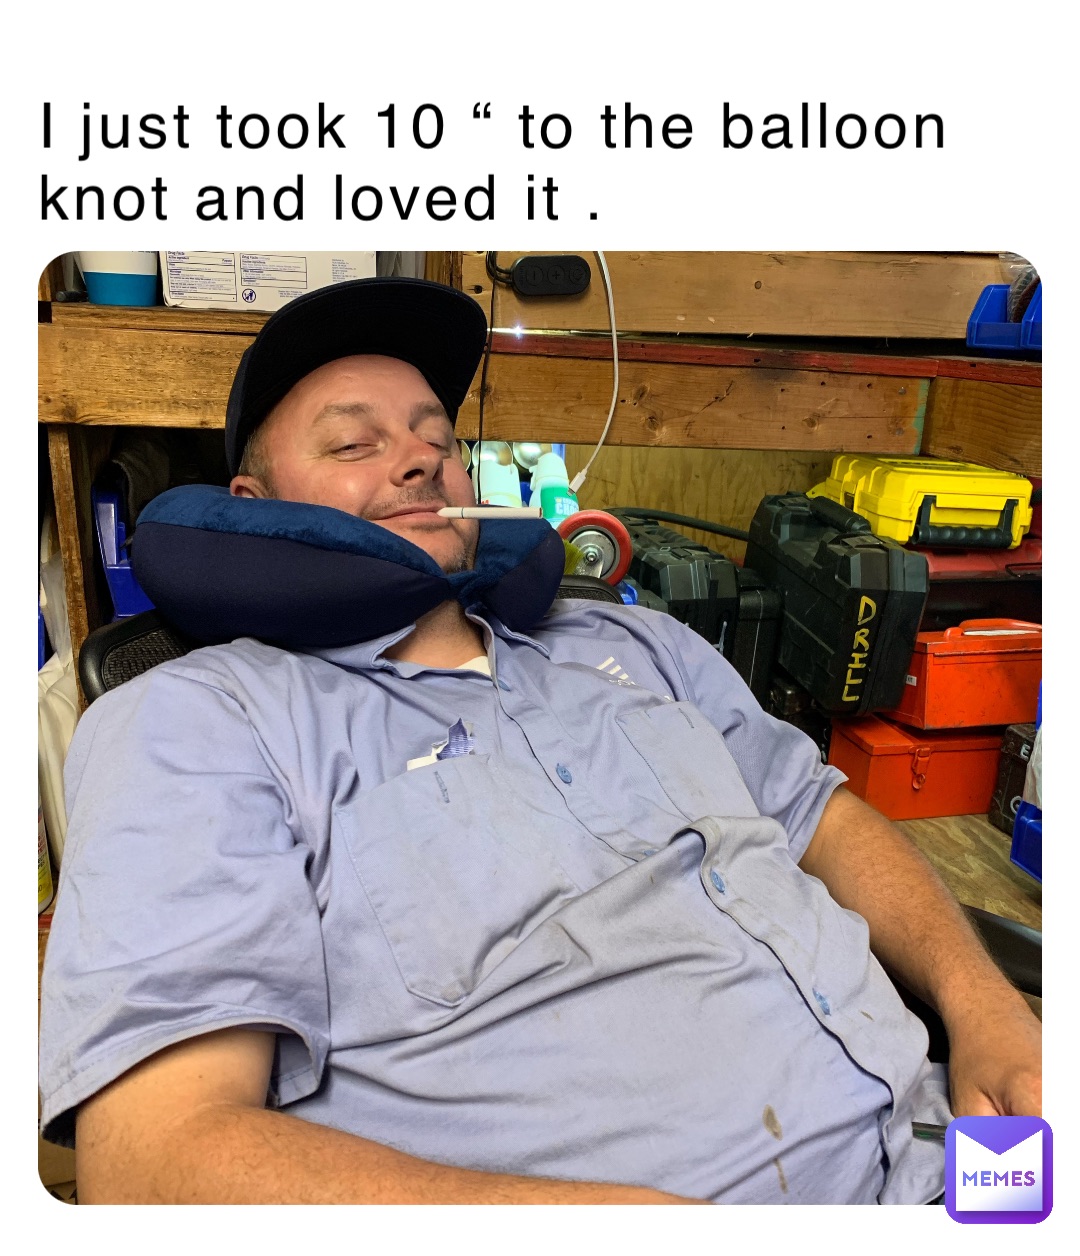 I Just Took 10 “ To The Balloon Knot And Loved It Pugarellir Memes 4585